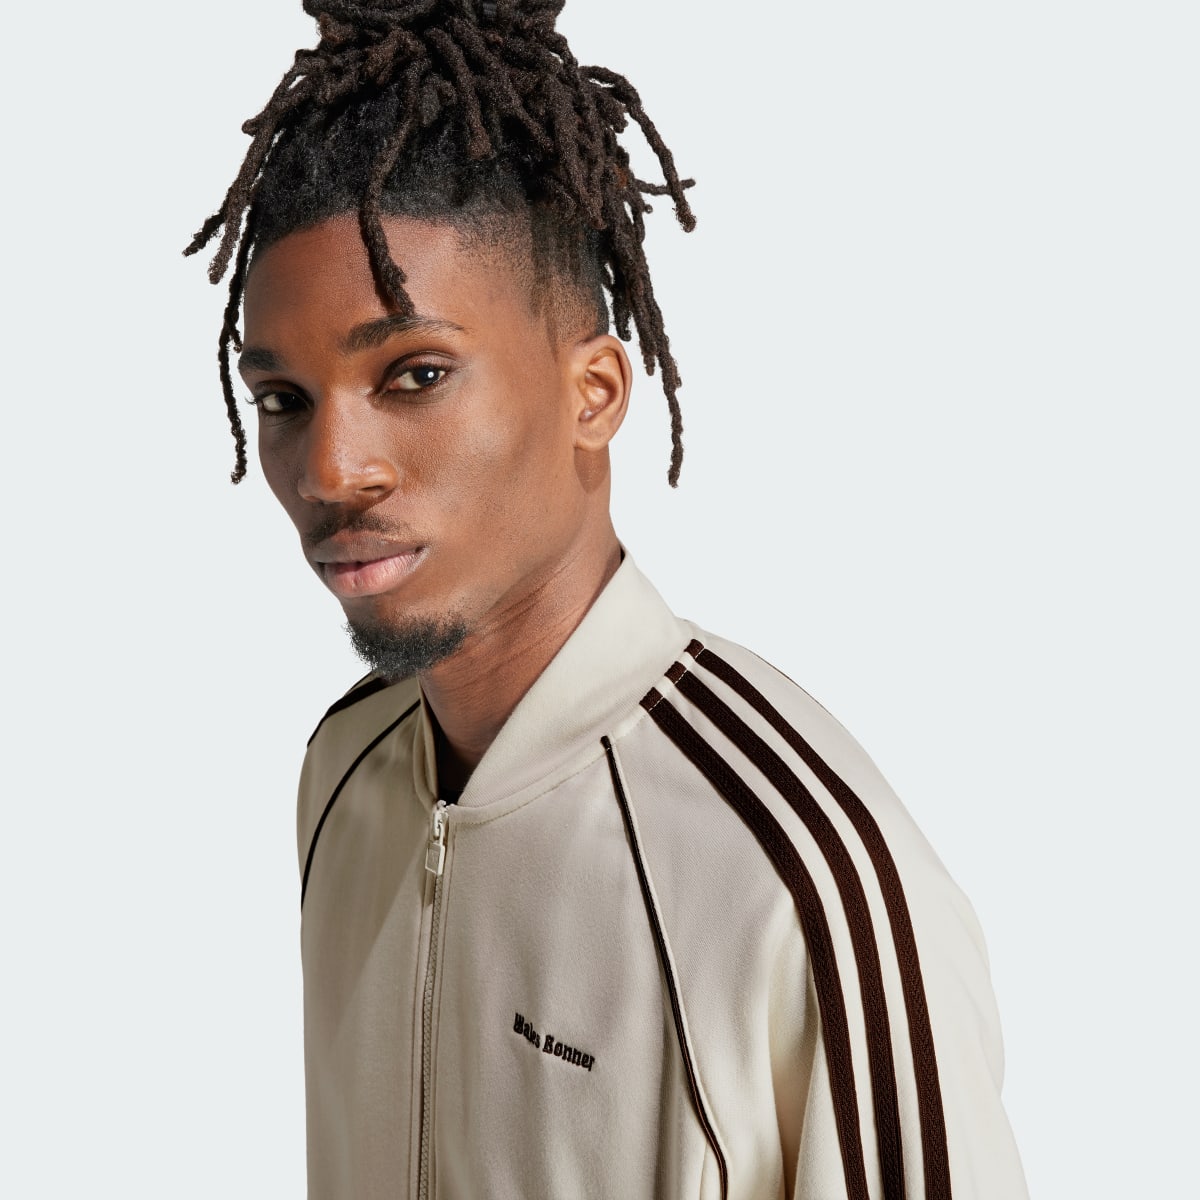 Adidas Track top Wales Bonner Statement. 8